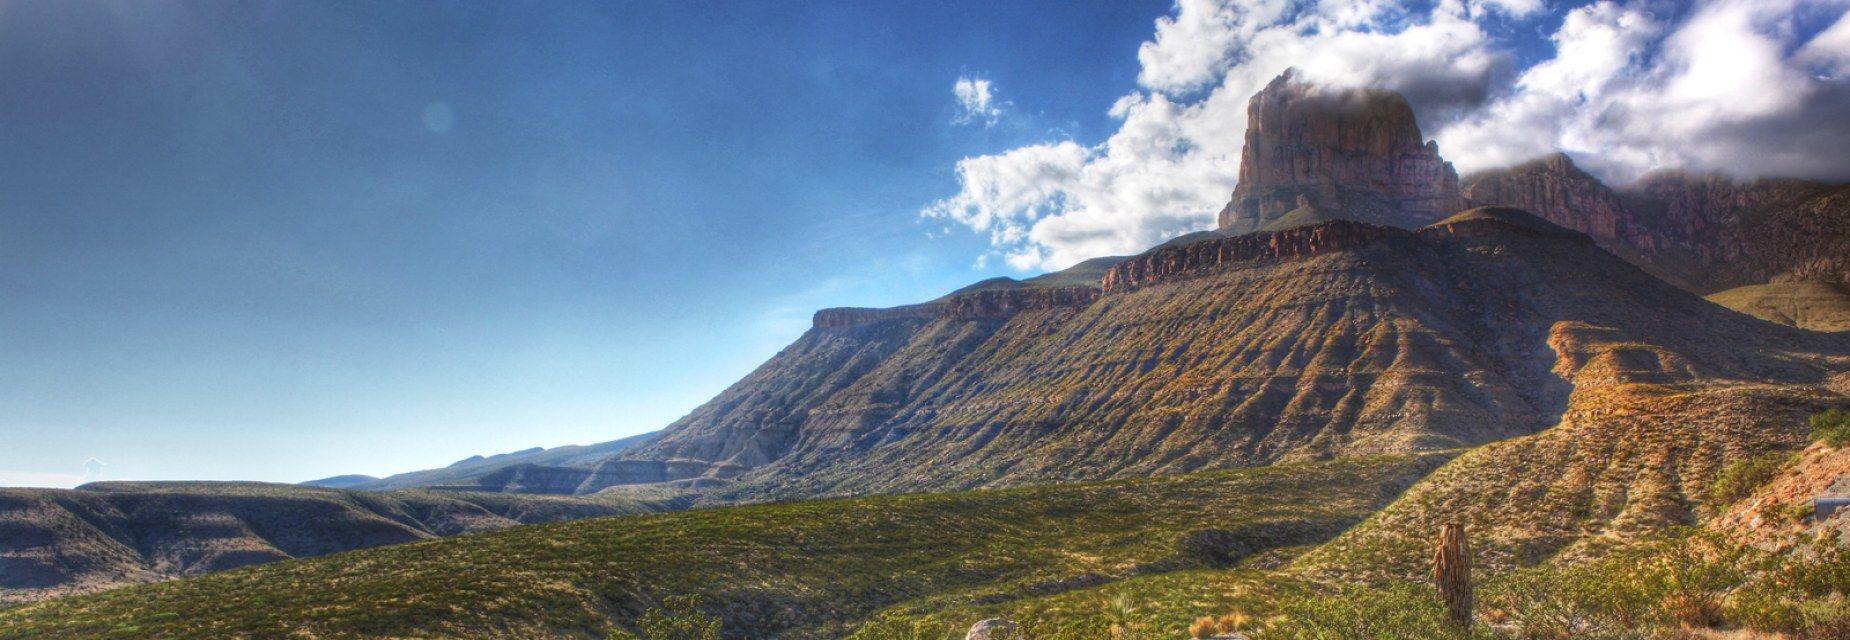 Guadalupe Mountains National Park Park in Texas